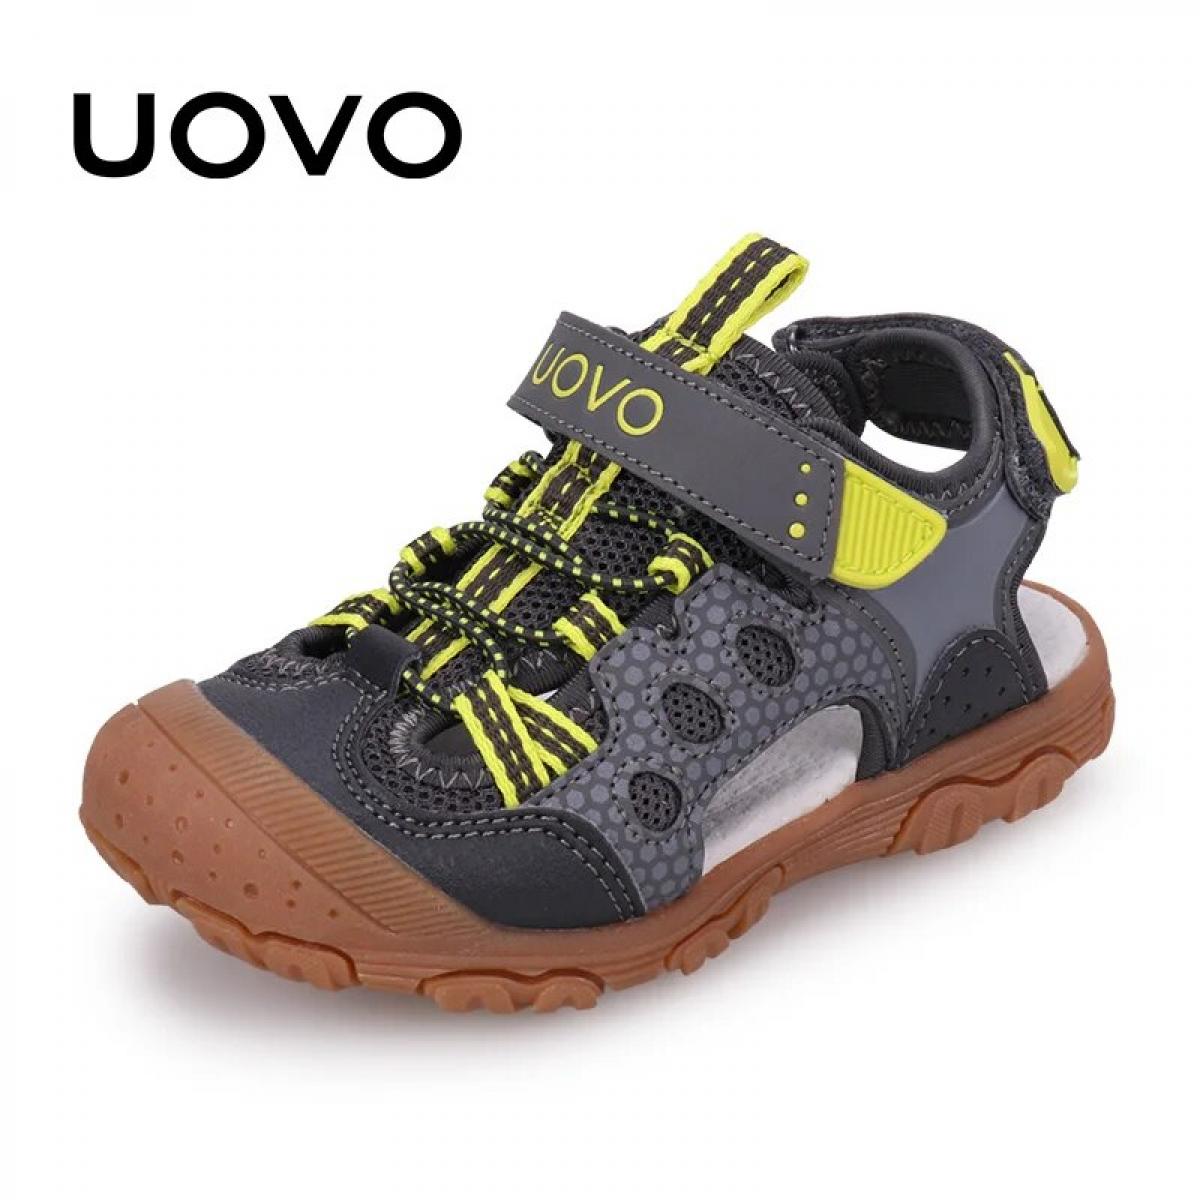 Uovo New Arrival Children Fashion Footwear Soft Durable Rubber Sole Kids Shoes Comfortable Boys Sandals With #2434  Sand